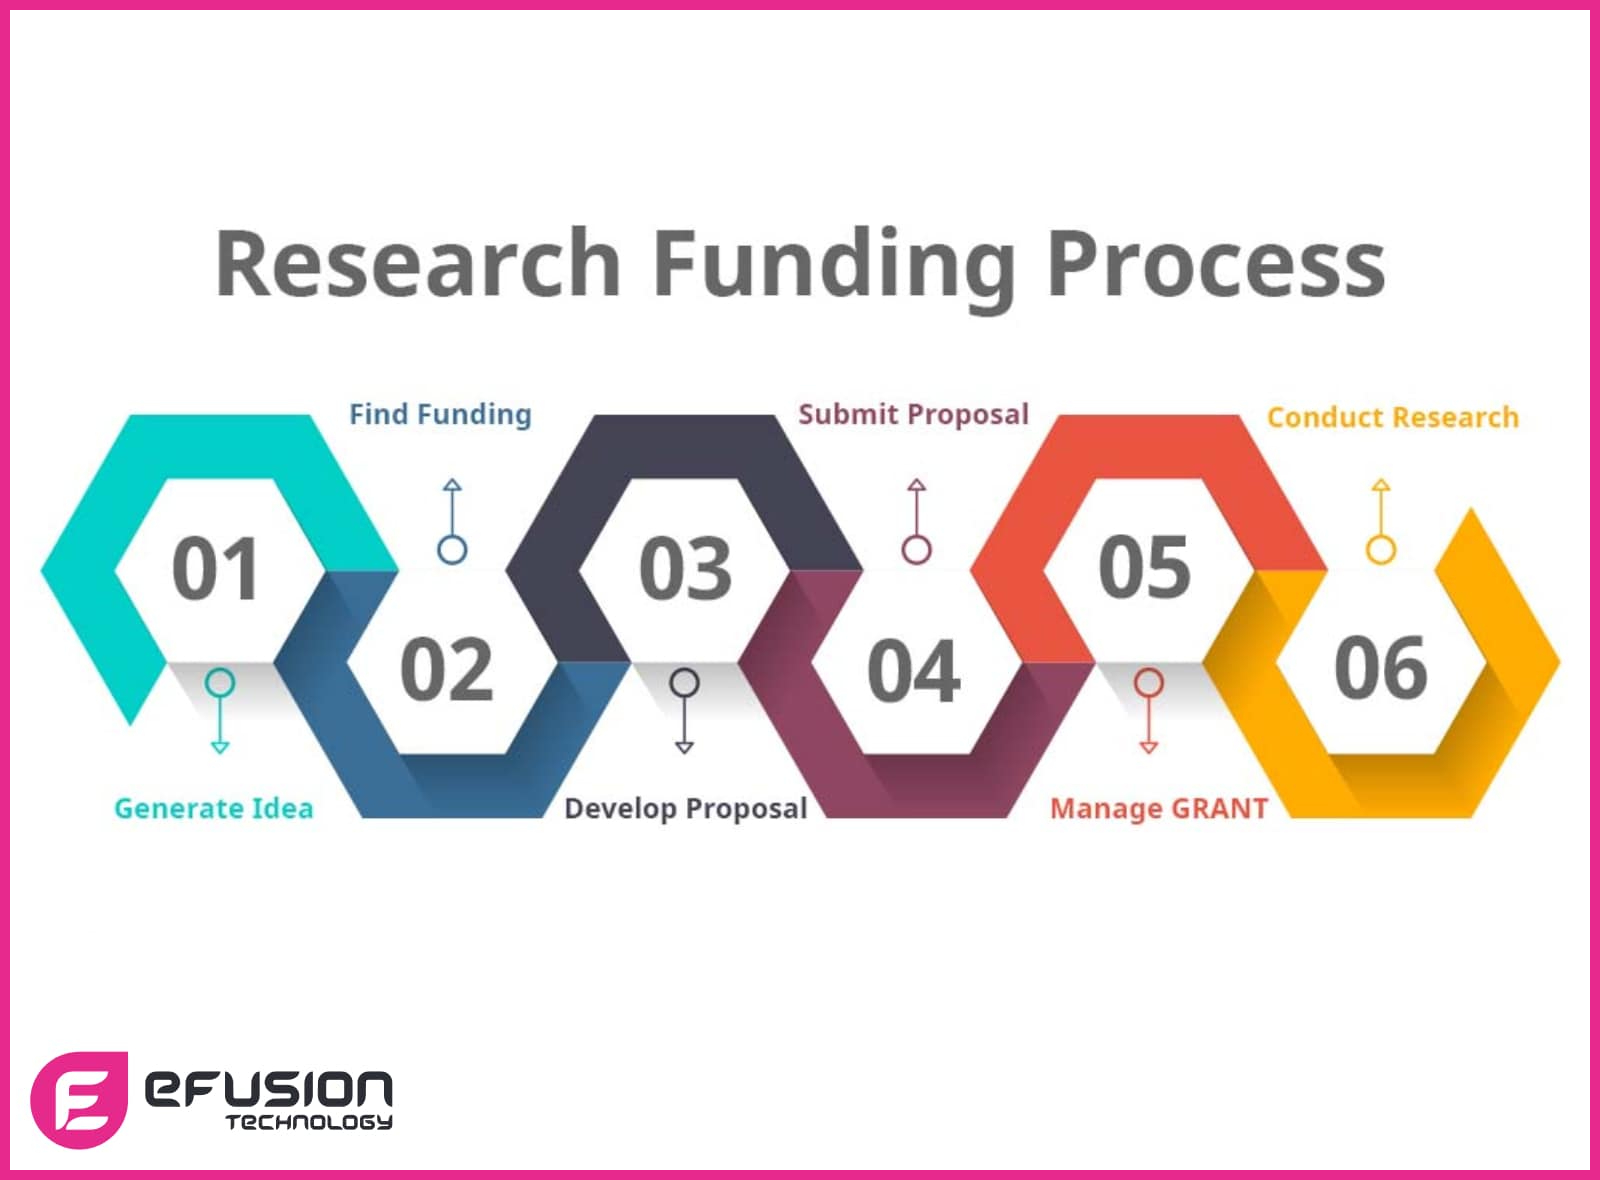 Research funding process grants for website design and development in Singapore